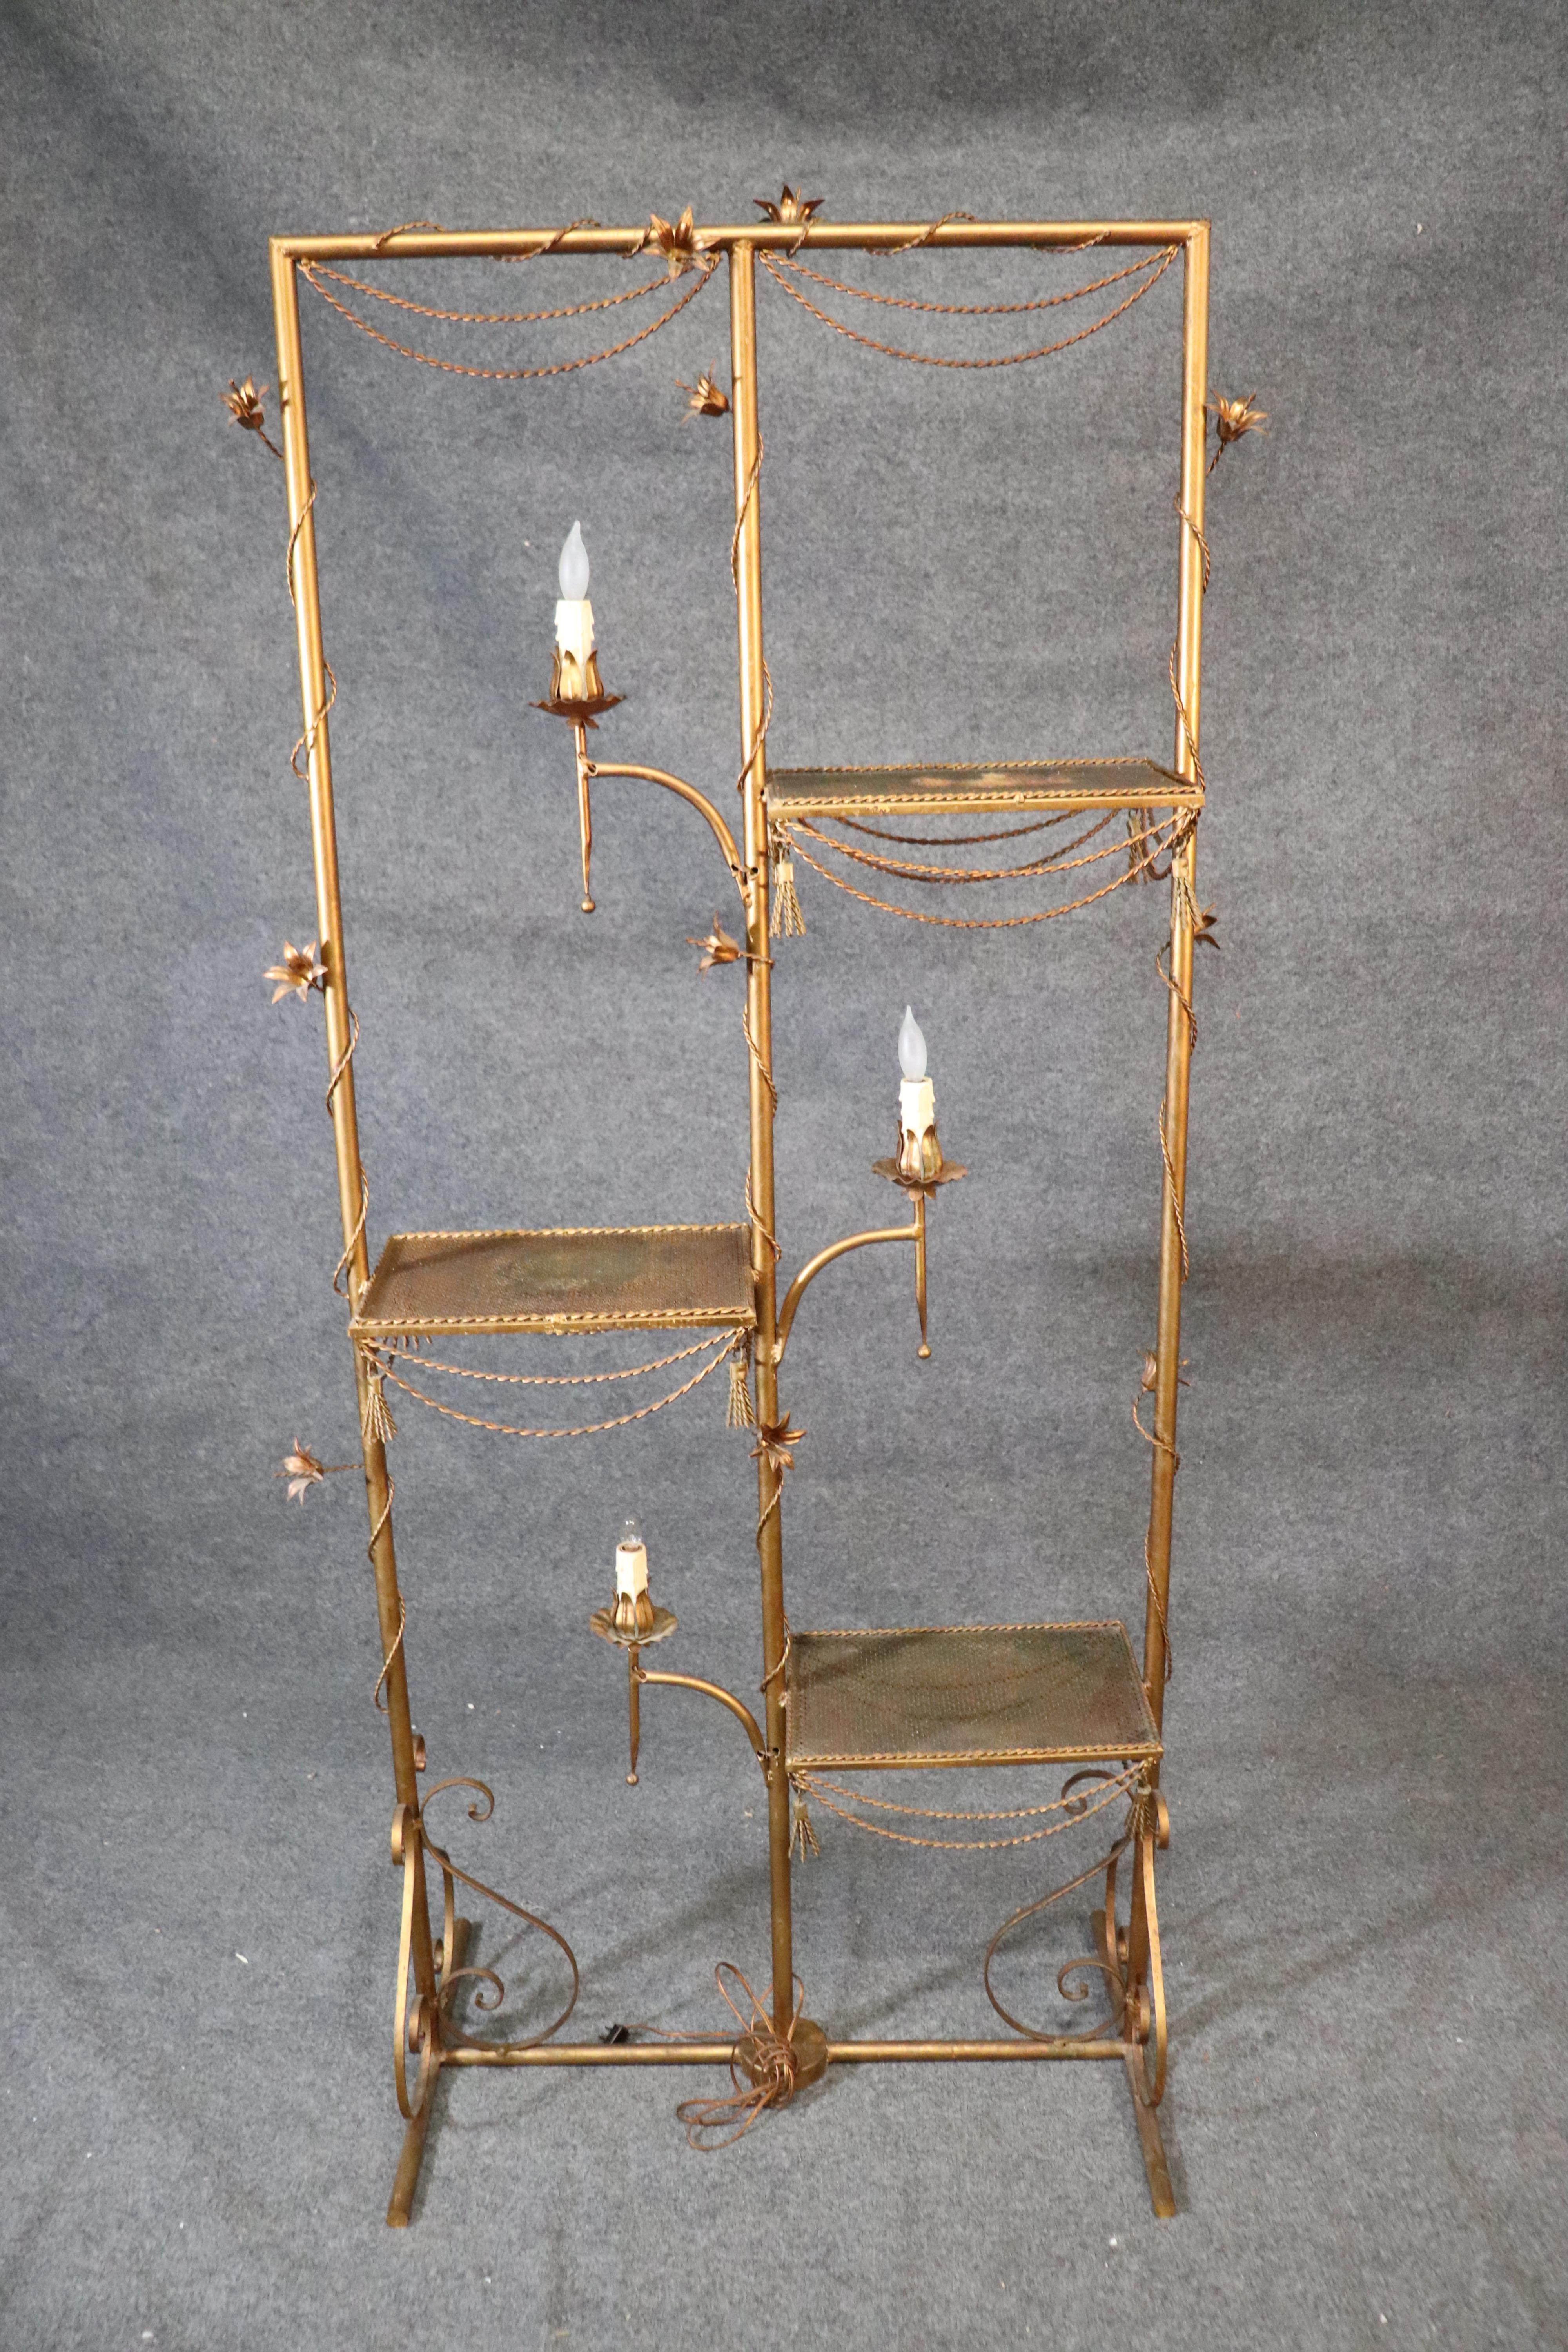 This is a rare item indeed. This is a great Italian made gilded metal tole étagère done in the Hollywood Regency tradition dating to 1950. The étagère features candle-form lights and flowers and tassels. The étagère measures 75 tall x 36 wide x 10